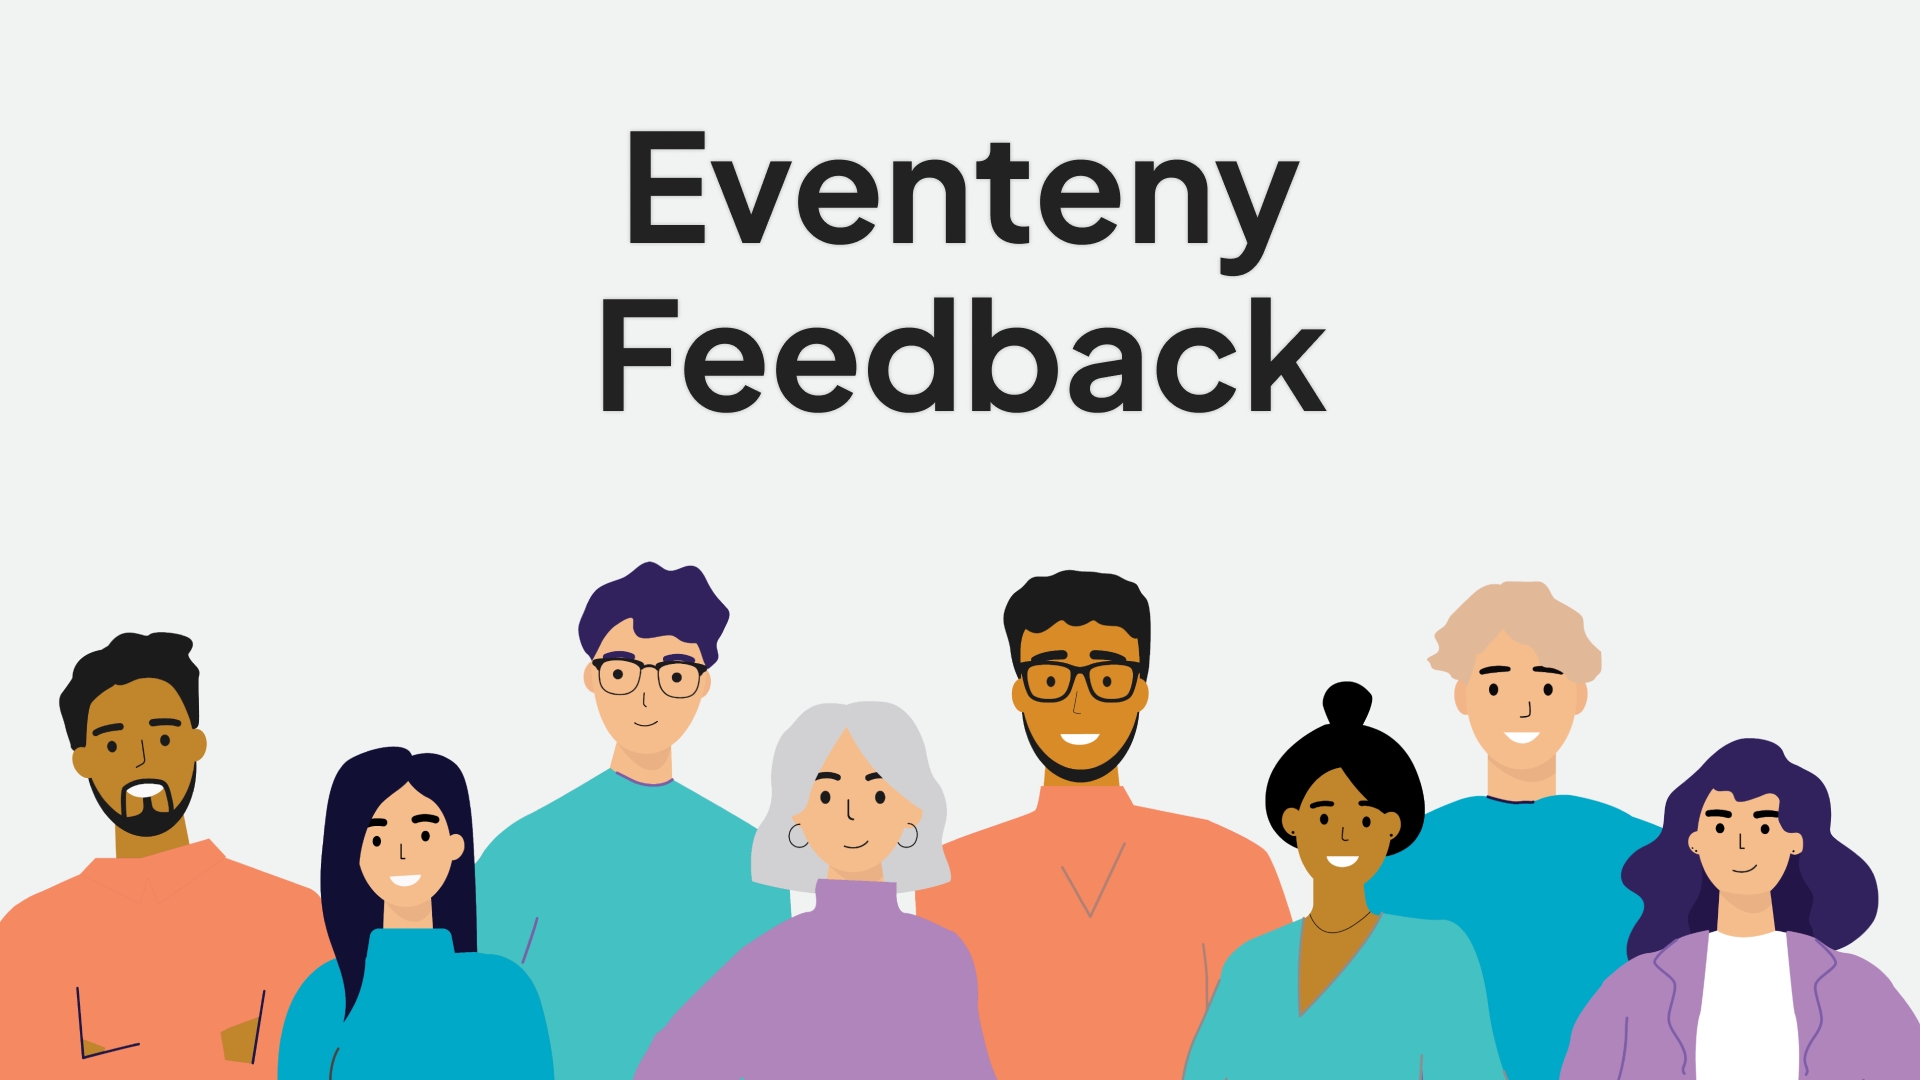 Eventeny Feedback cover image